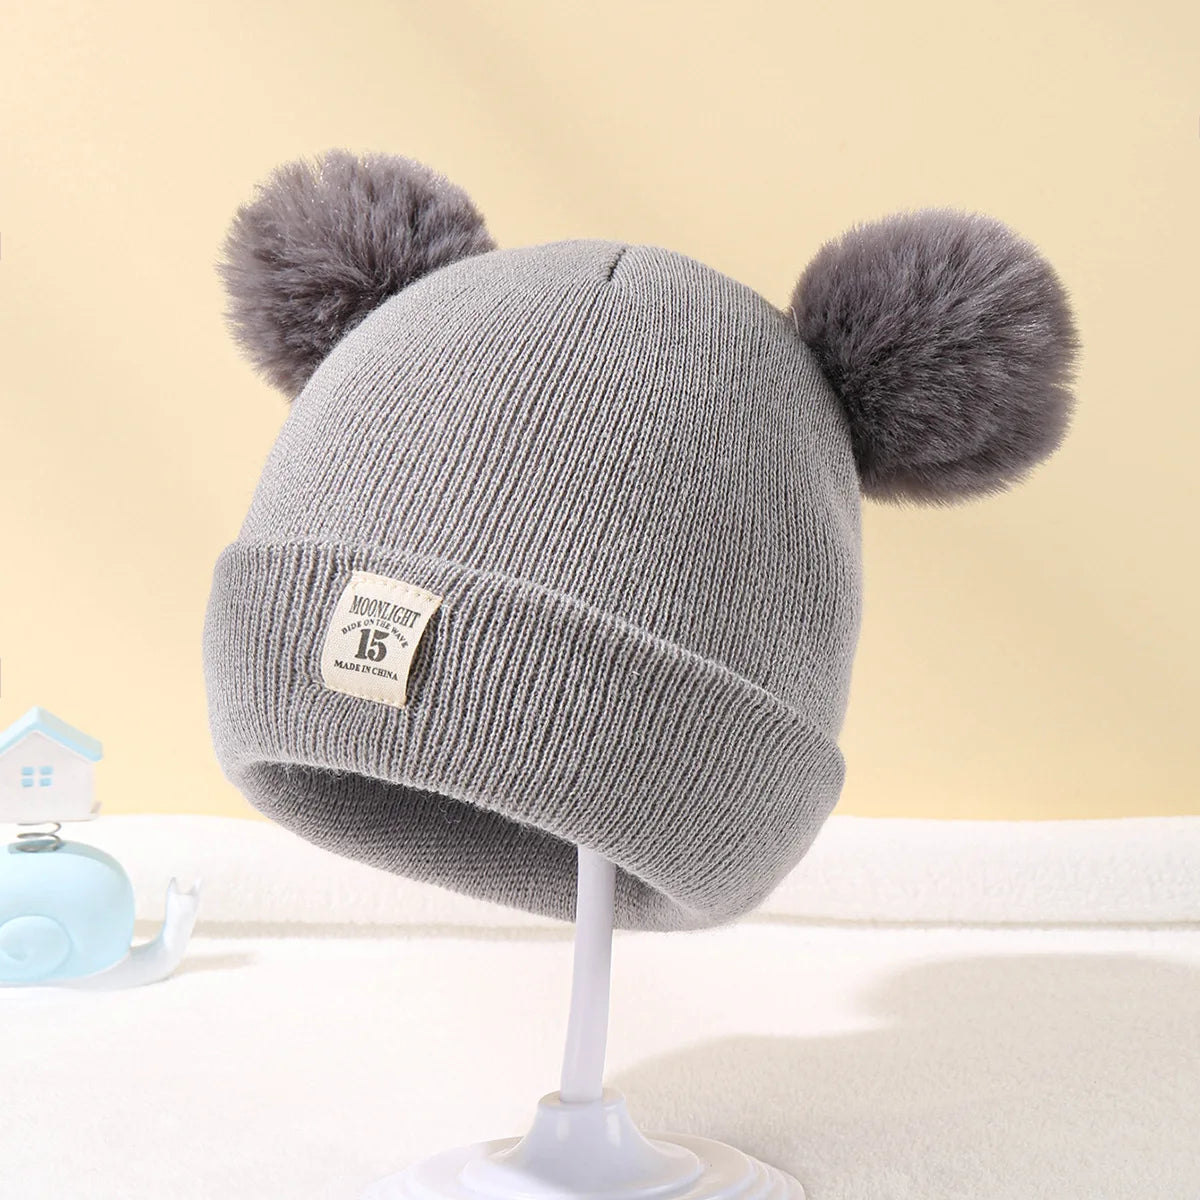 Solid Color Wool Knitted Bonnet , Cute Winter Hat For Kids Boys Girls Children Warm Beanie Cap 0-3Y